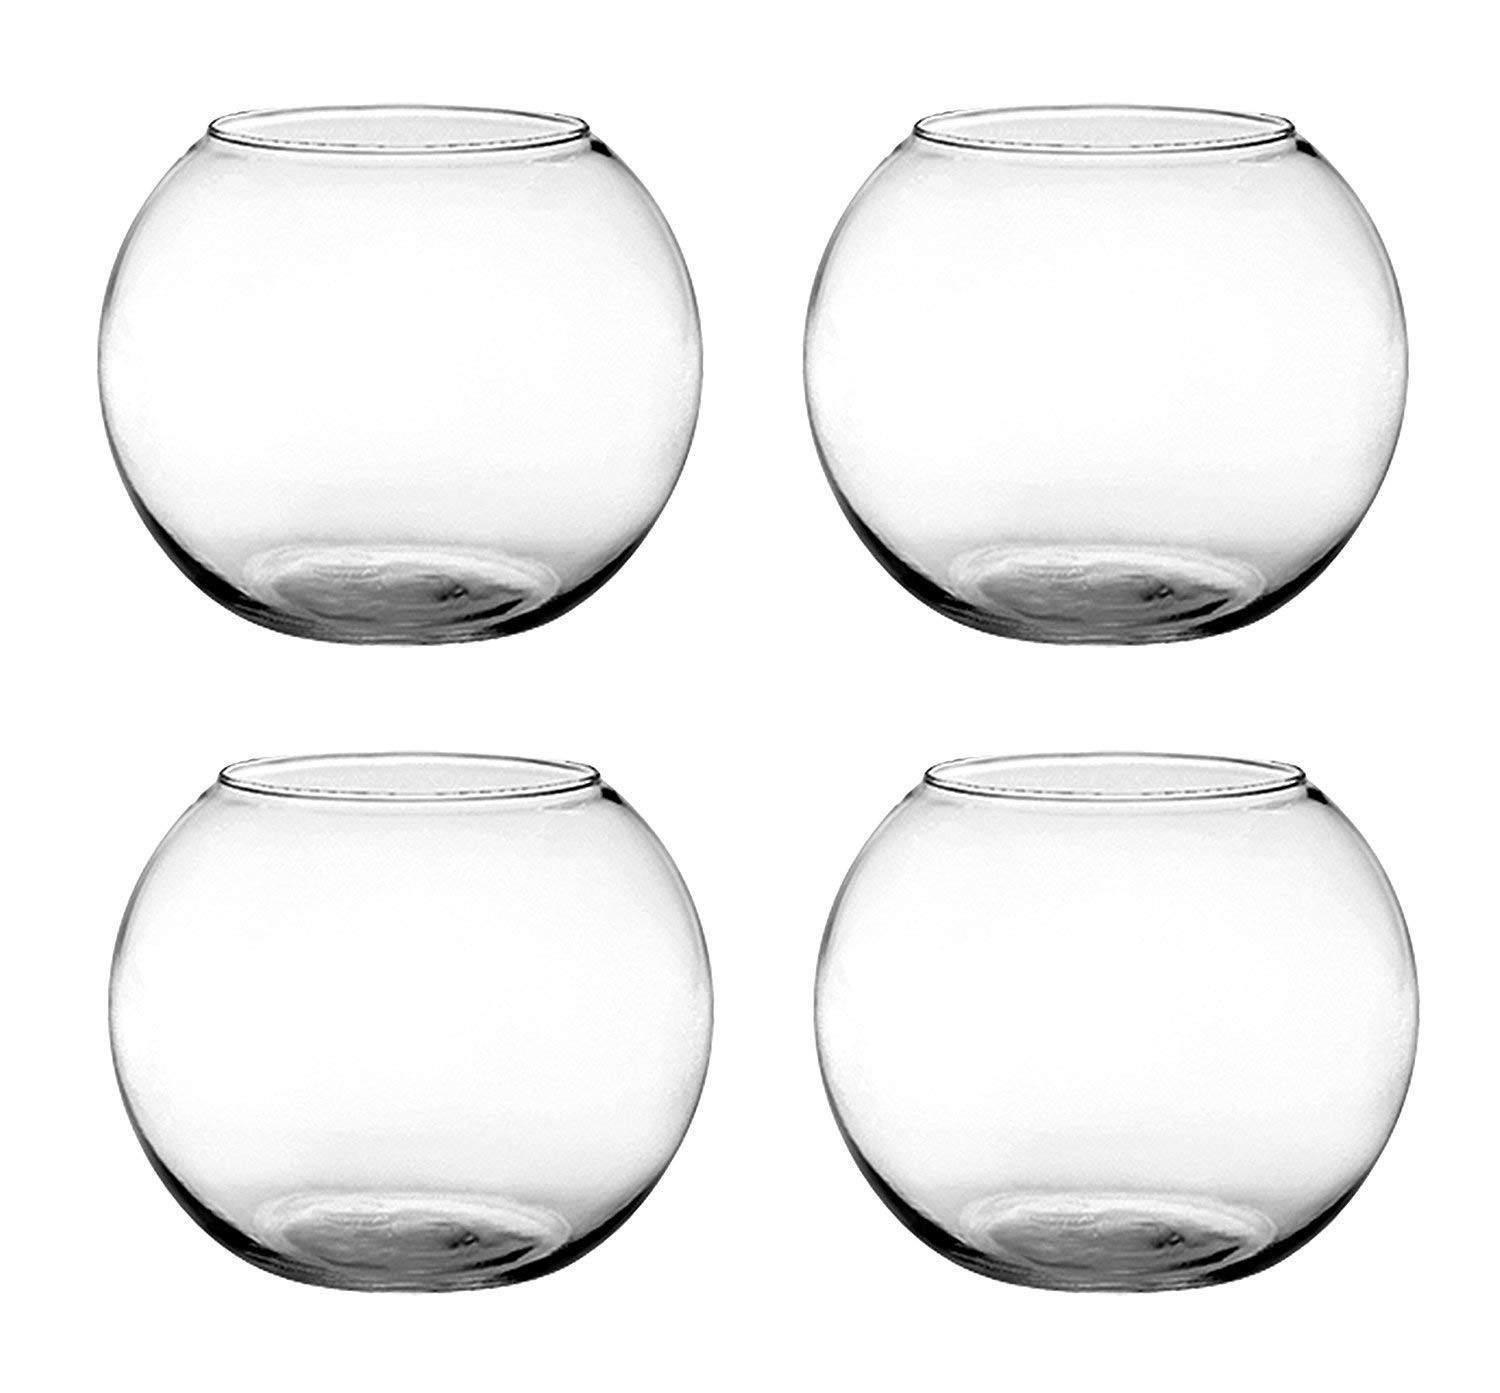 24 Amazing 8 Inch Glass Vase 2024 free download 8 inch glass vase of amazon com floral supply online set of 4 6 rose bowls glass throughout amazon com floral supply online set of 4 6 rose bowls glass round vases for weddings events decora